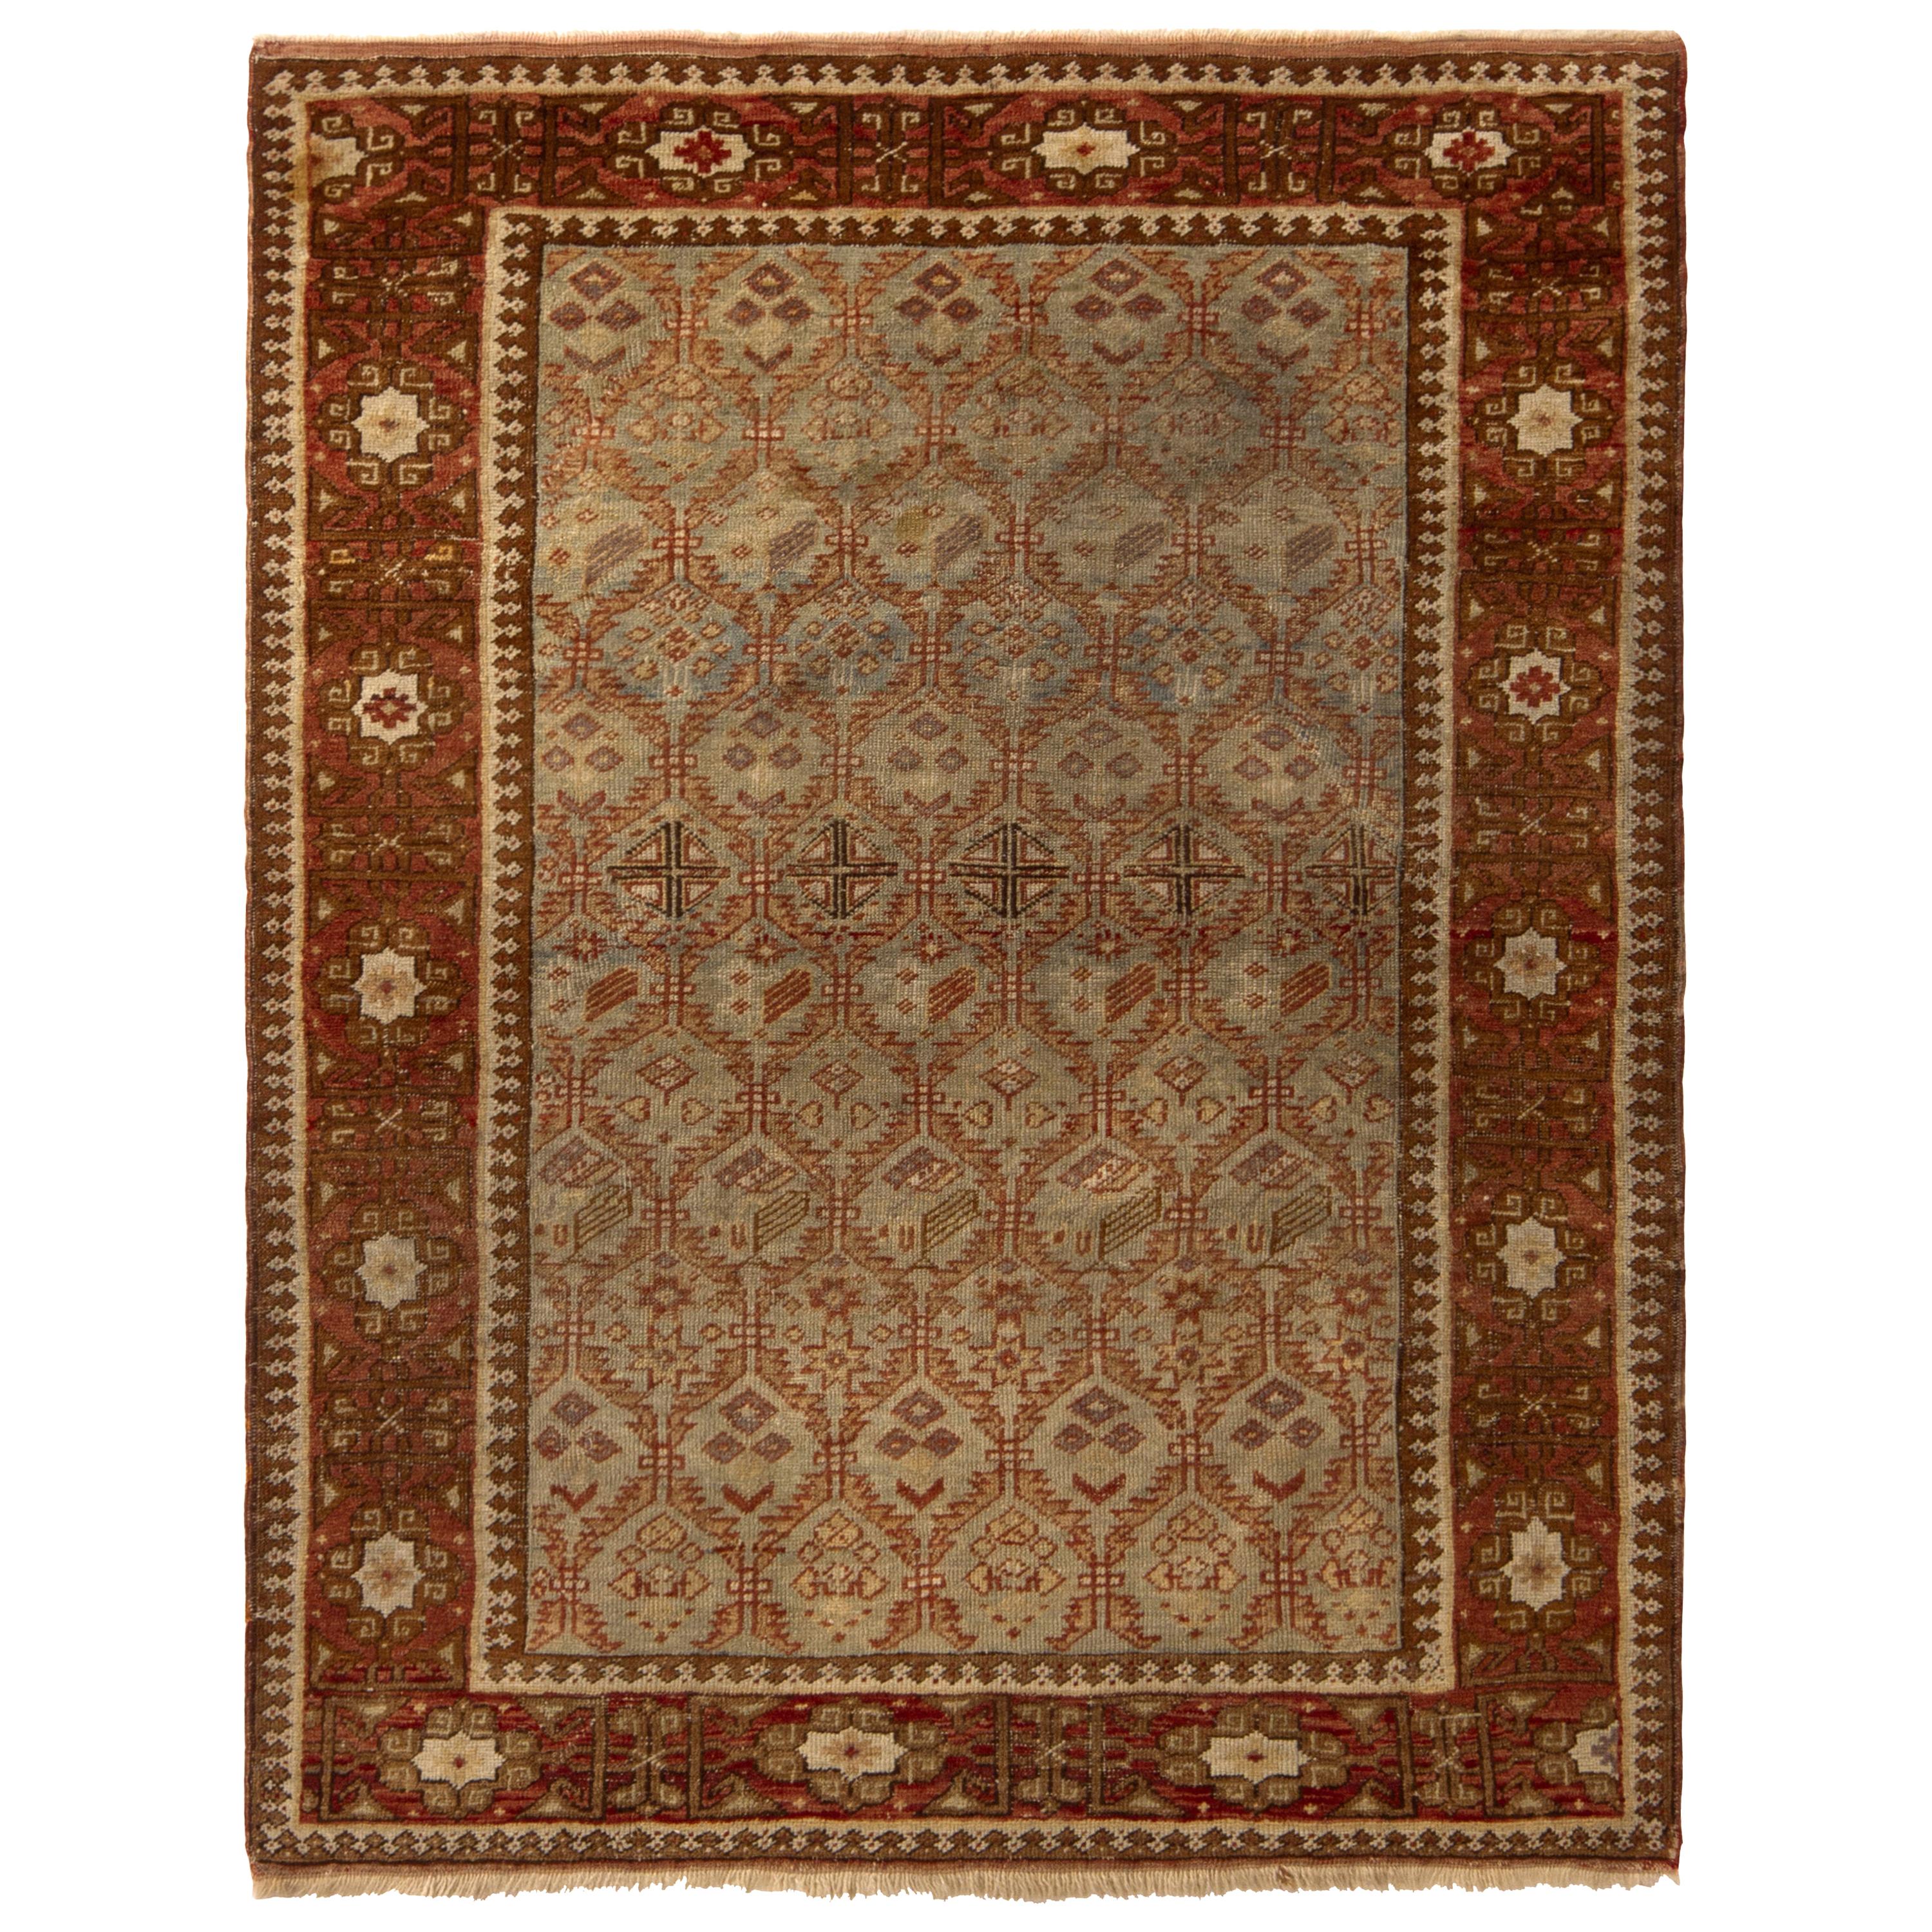 Antique Shirvan Rug Geometric Beige and Red Transitional Pattern by Rug & Kilim